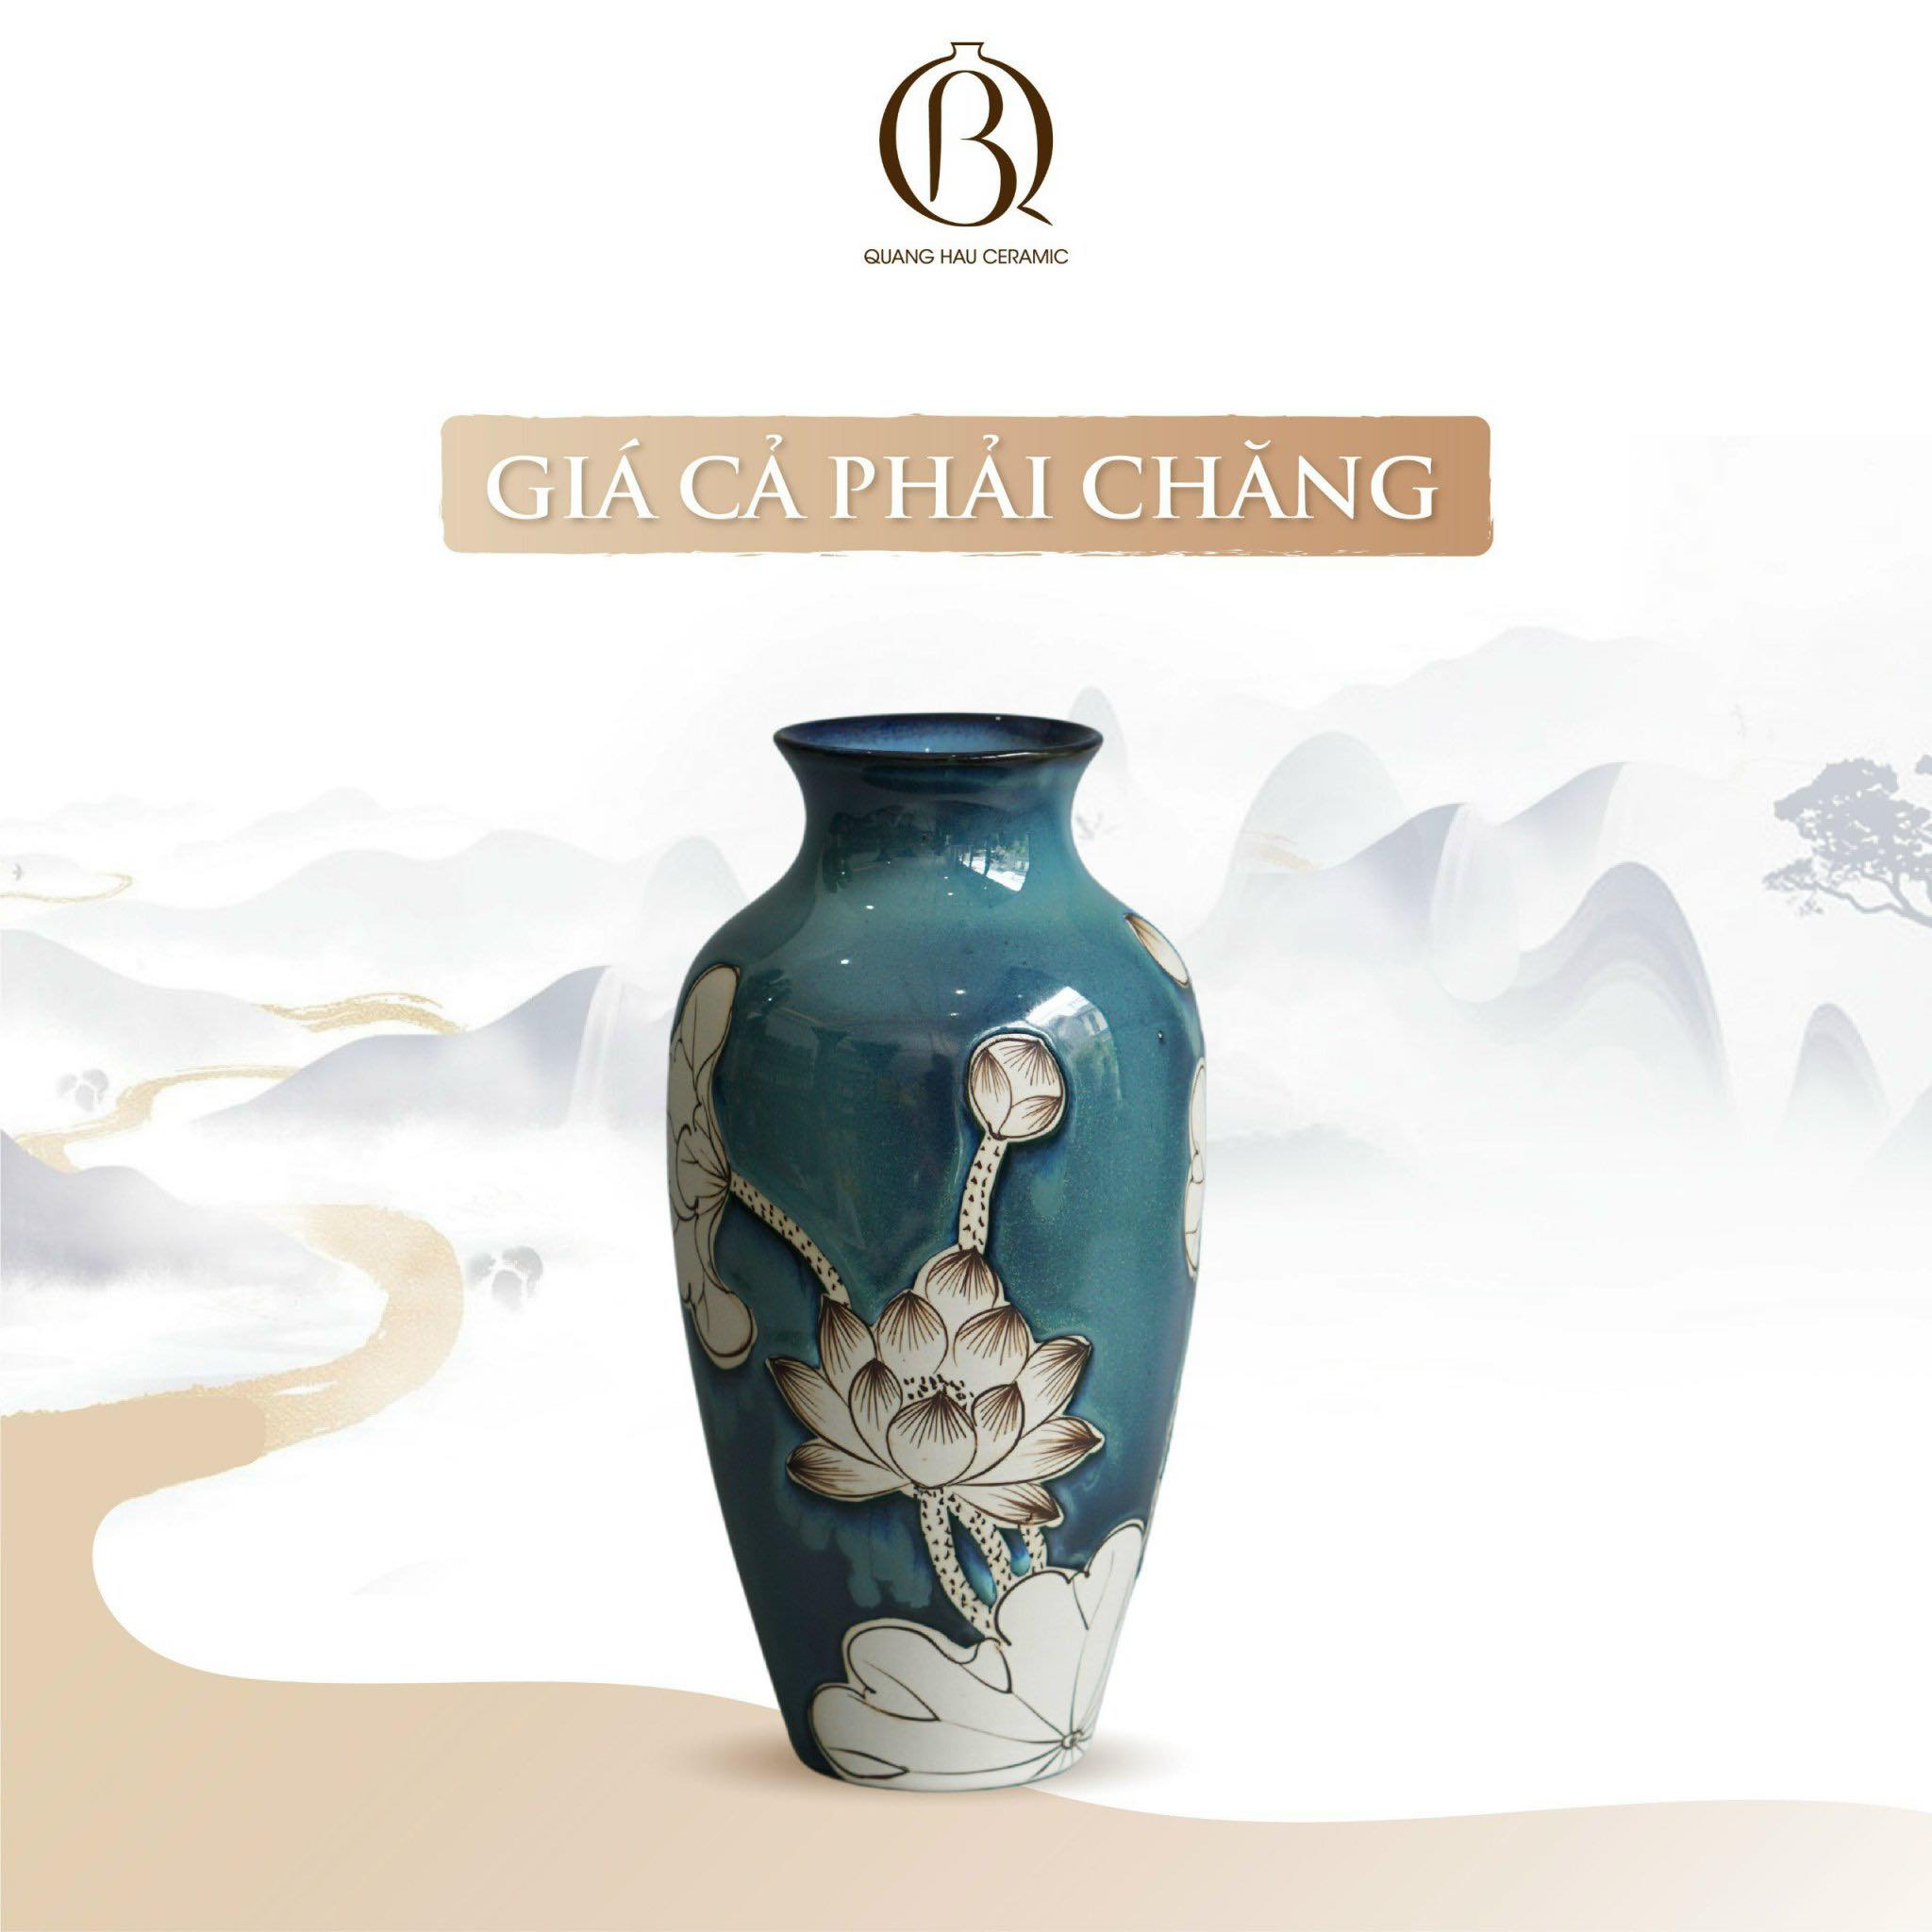 Quang Hau Ceramic Worldwide shipping available now 2